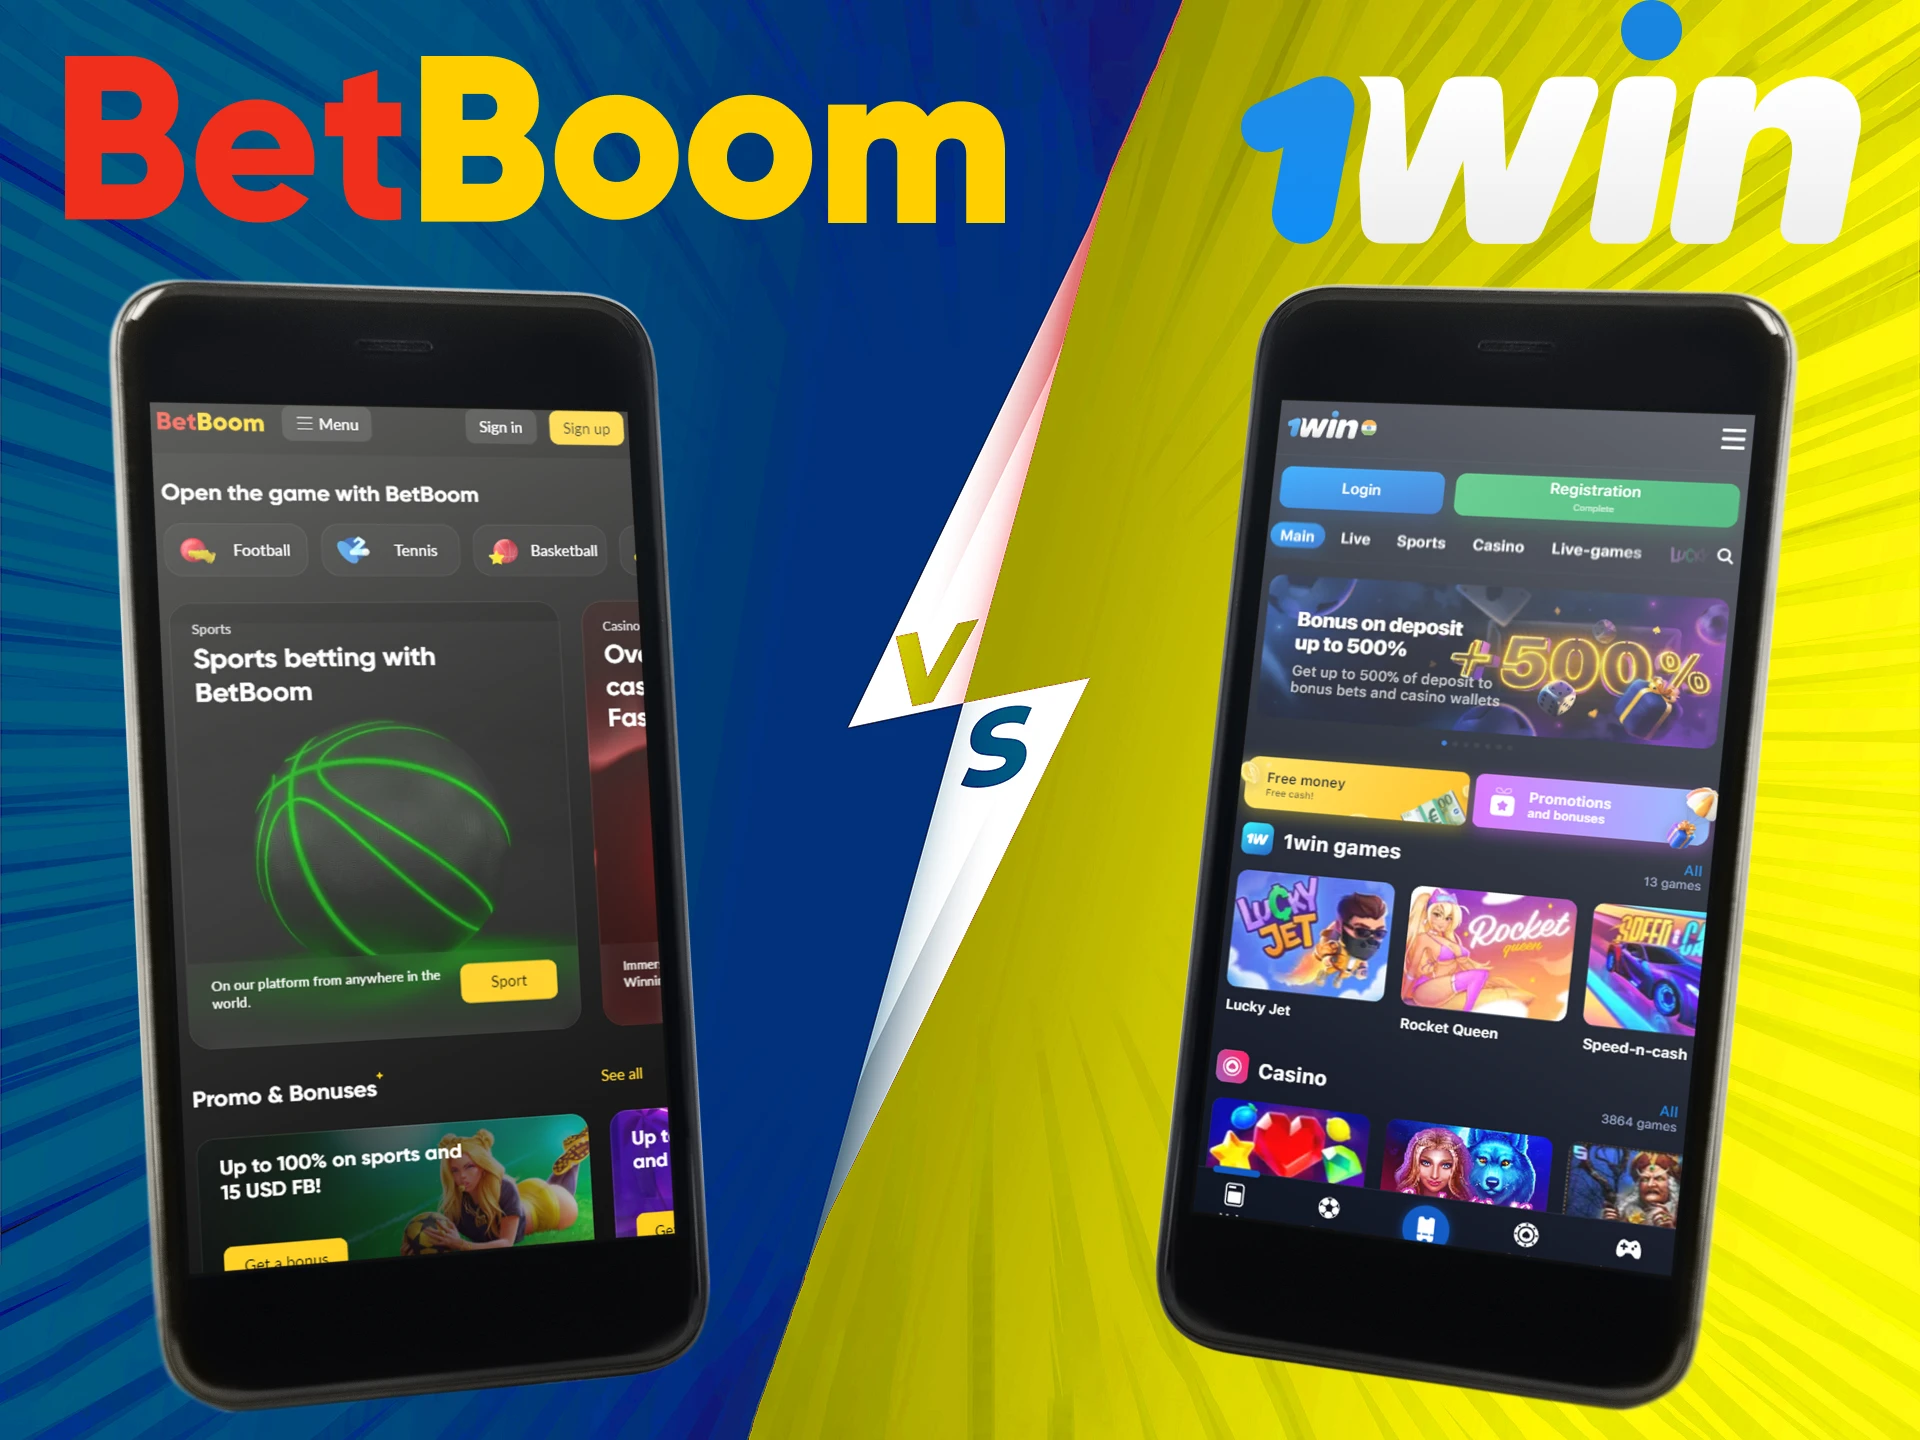 1win and BetBoom have convenient applications, find out the differences.